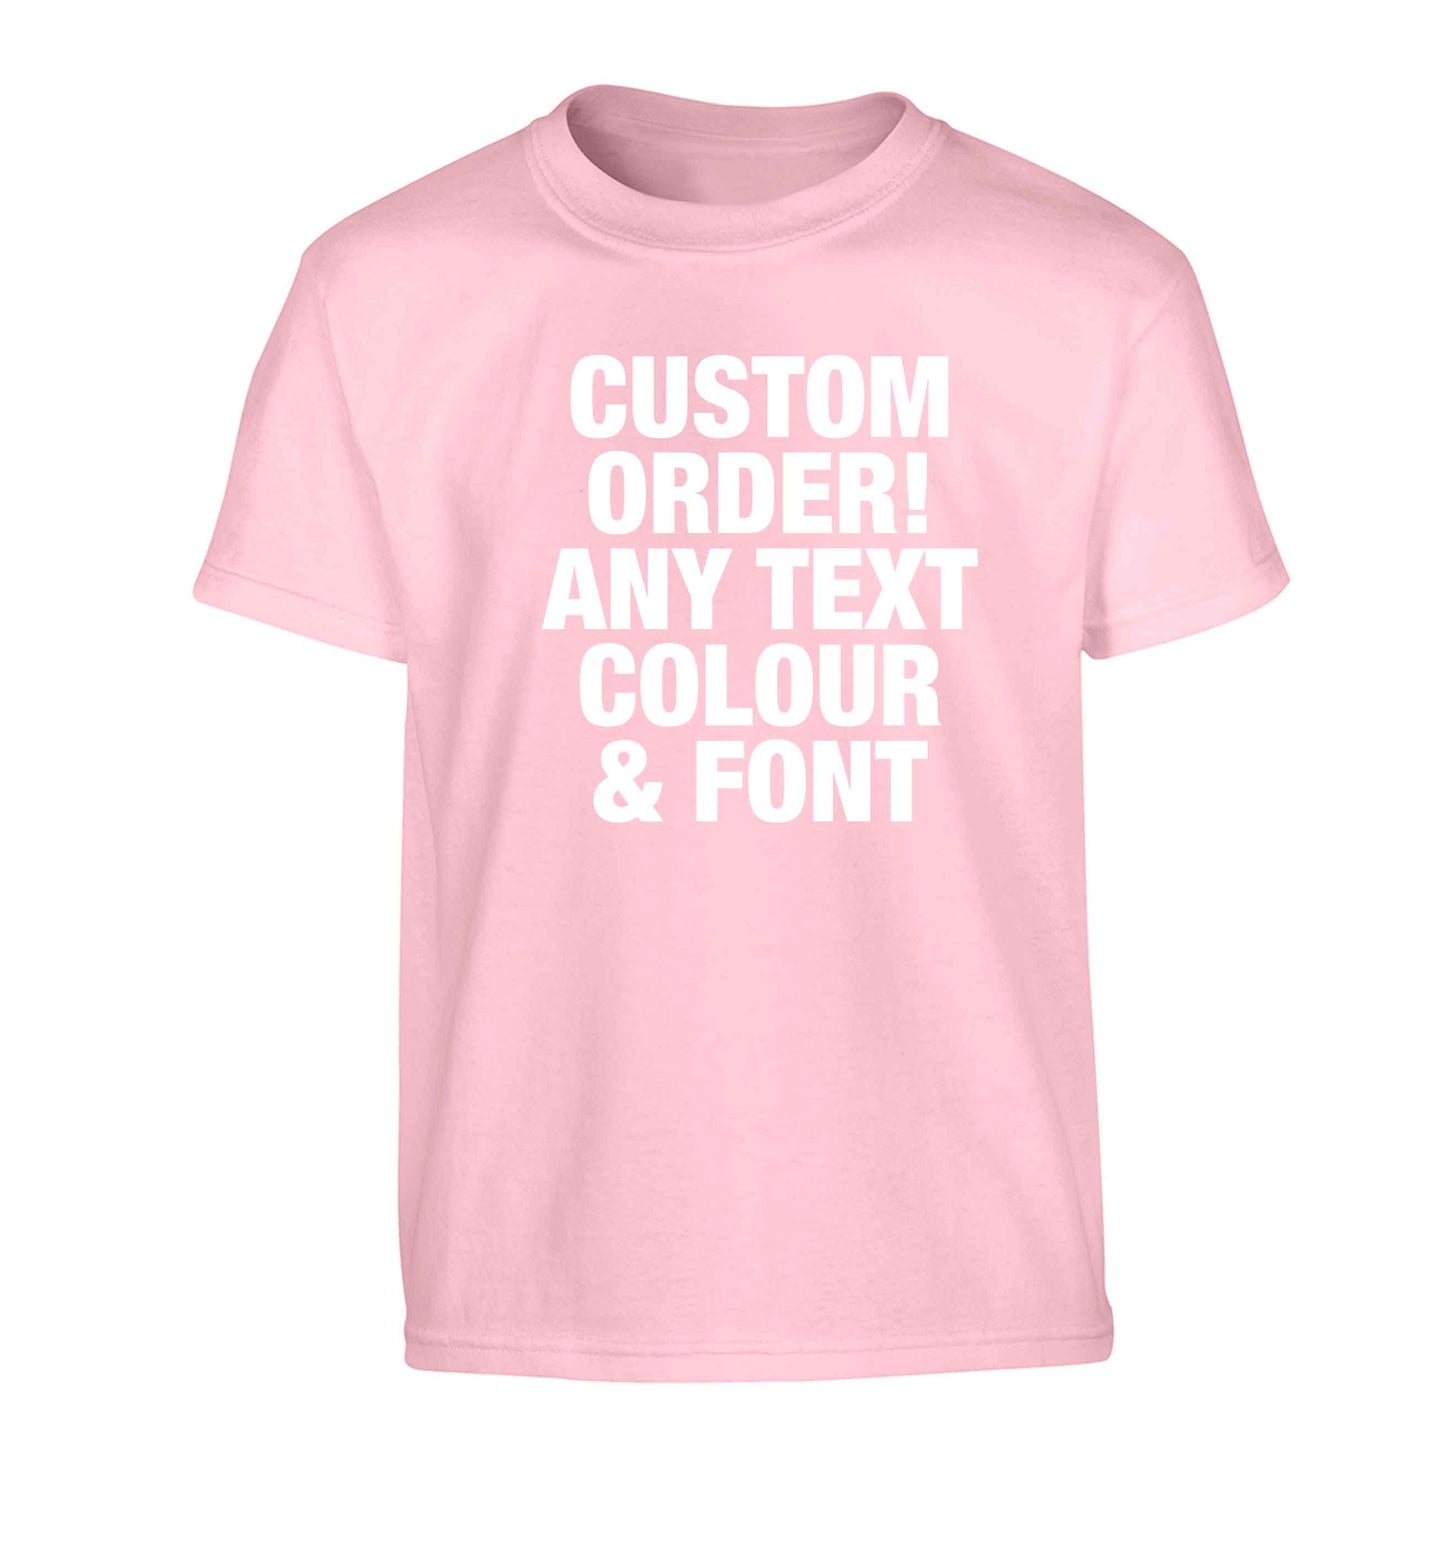 Custom order any text colour and font Children's light pink Tshirt 12-13 Years